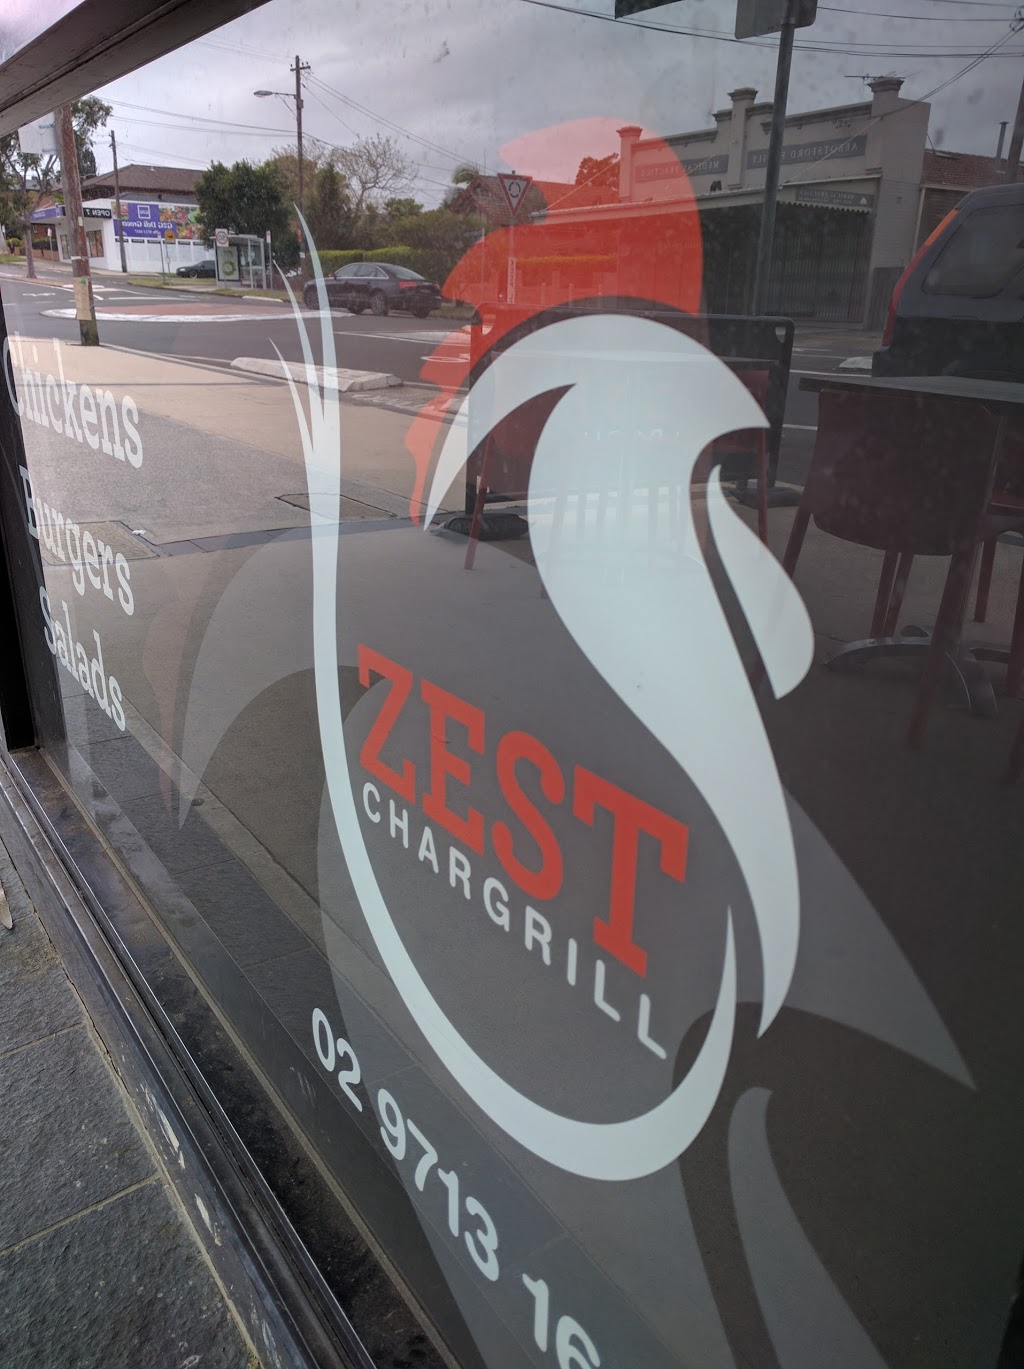 Abbotsford Zest Chargrill Chicken | restaurant | 312 Great N Rd, Wareemba NSW 2046, Australia | 0297131680 OR +61 2 9713 1680